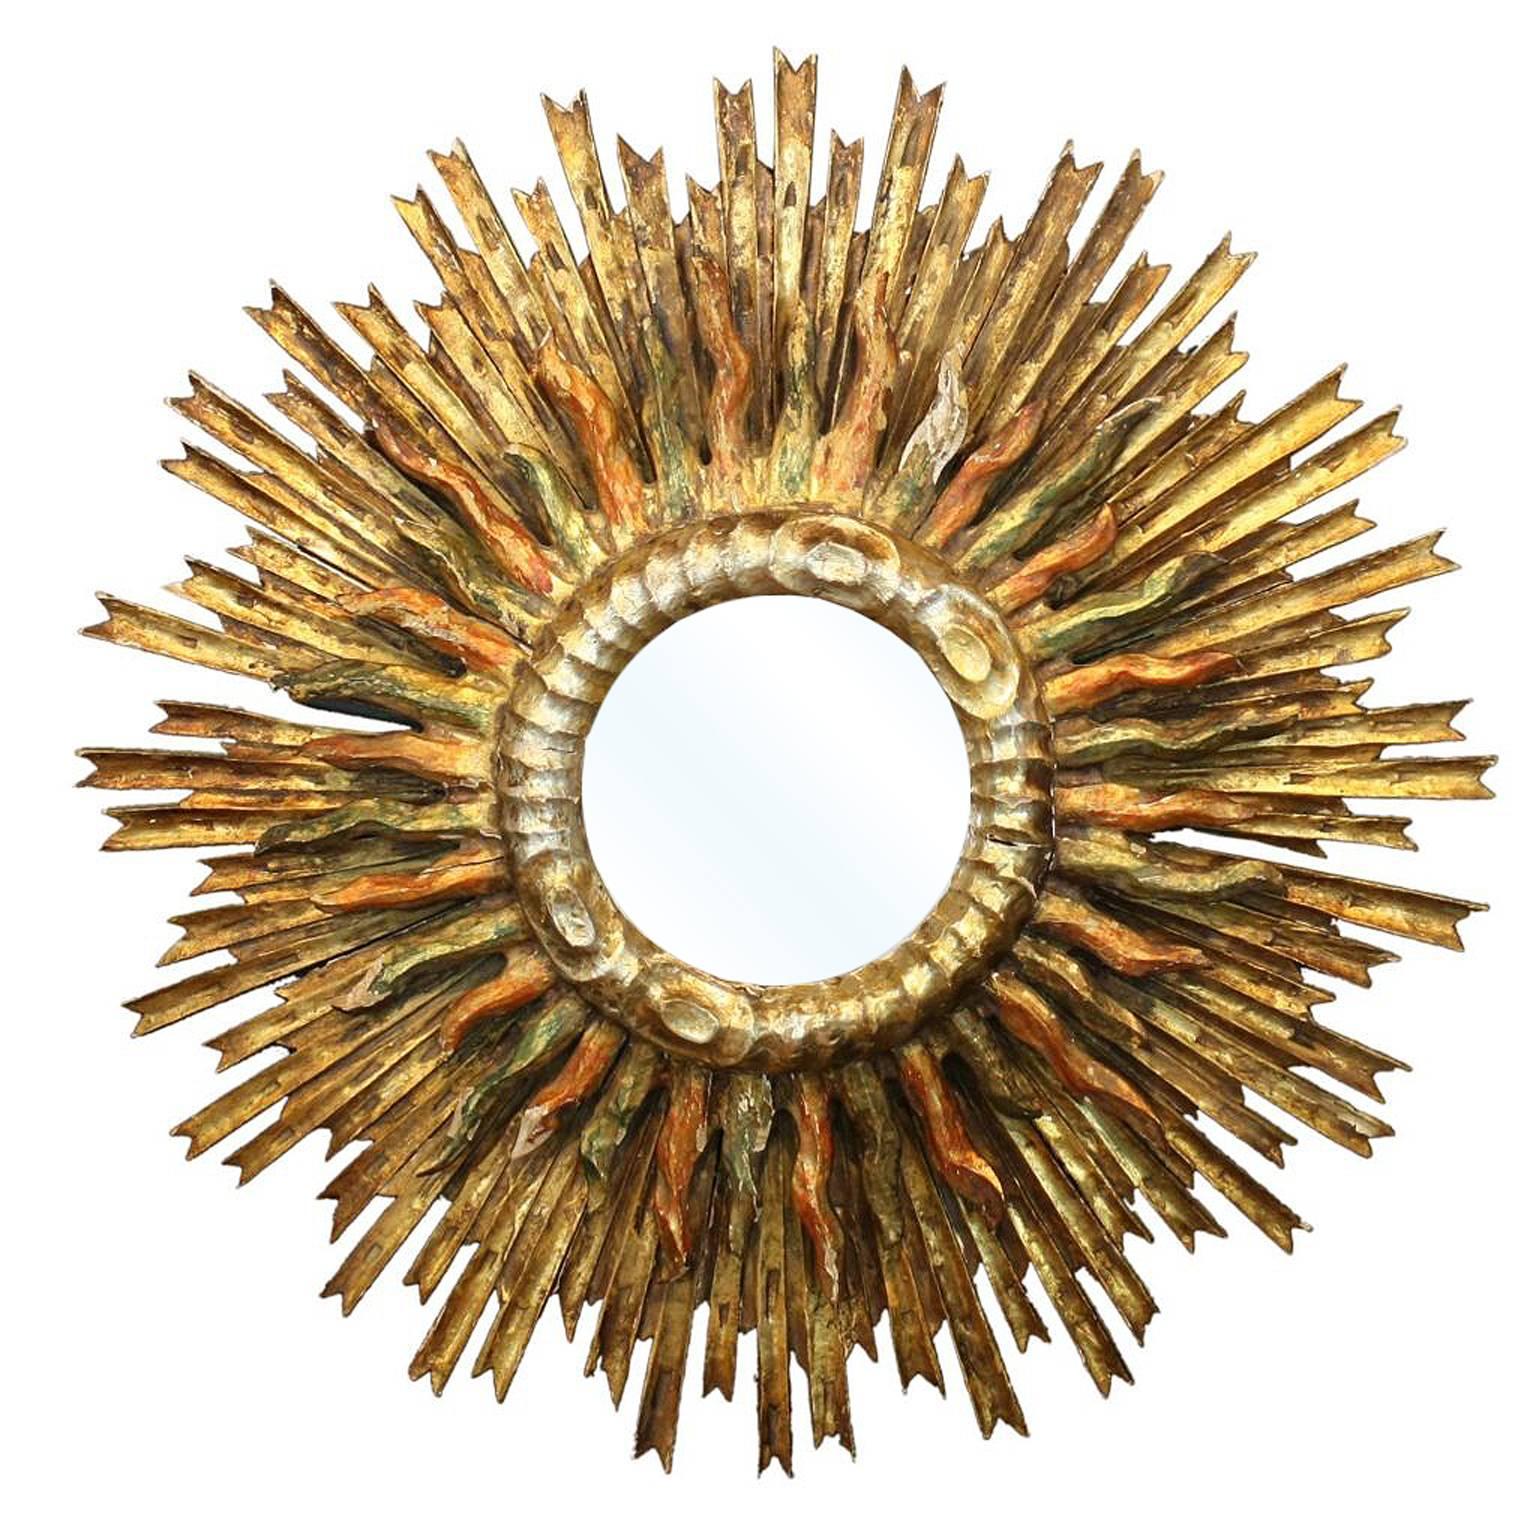 Italian 1890s Giltwood Double Sunburst Mirror with Red and Green Painted Accents